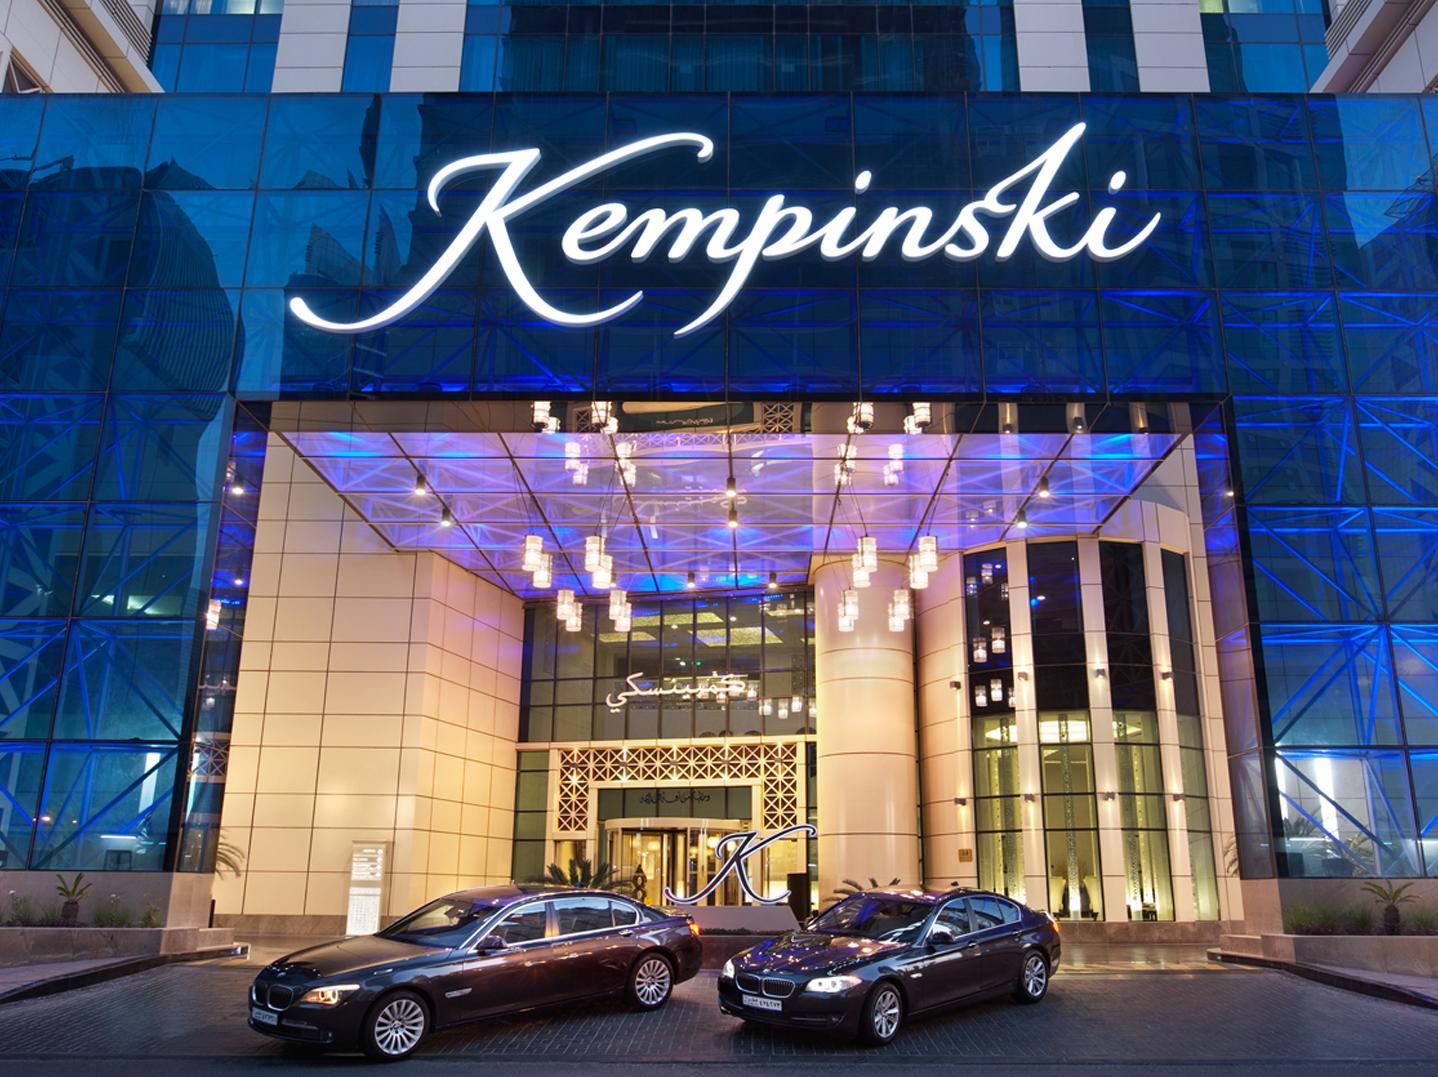 Kempinski Residences & Suites Doha FAQ 2016, What facilities are there in Kempinski Residences & Suites Doha 2016, What Languages Spoken are Supported in Kempinski Residences & Suites Doha 2016, Which payment cards are accepted in Kempinski Residences & Suites Doha , Doha Kempinski Residences & Suites room facilities and services Q&A 2016, Doha Kempinski Residences & Suites online booking services 2016, Doha Kempinski Residences & Suites address 2016, Doha Kempinski Residences & Suites telephone number 2016,Doha Kempinski Residences & Suites map 2016, Doha Kempinski Residences & Suites traffic guide 2016, how to go Doha Kempinski Residences & Suites, Doha Kempinski Residences & Suites booking online 2016, Doha Kempinski Residences & Suites room types 2016.